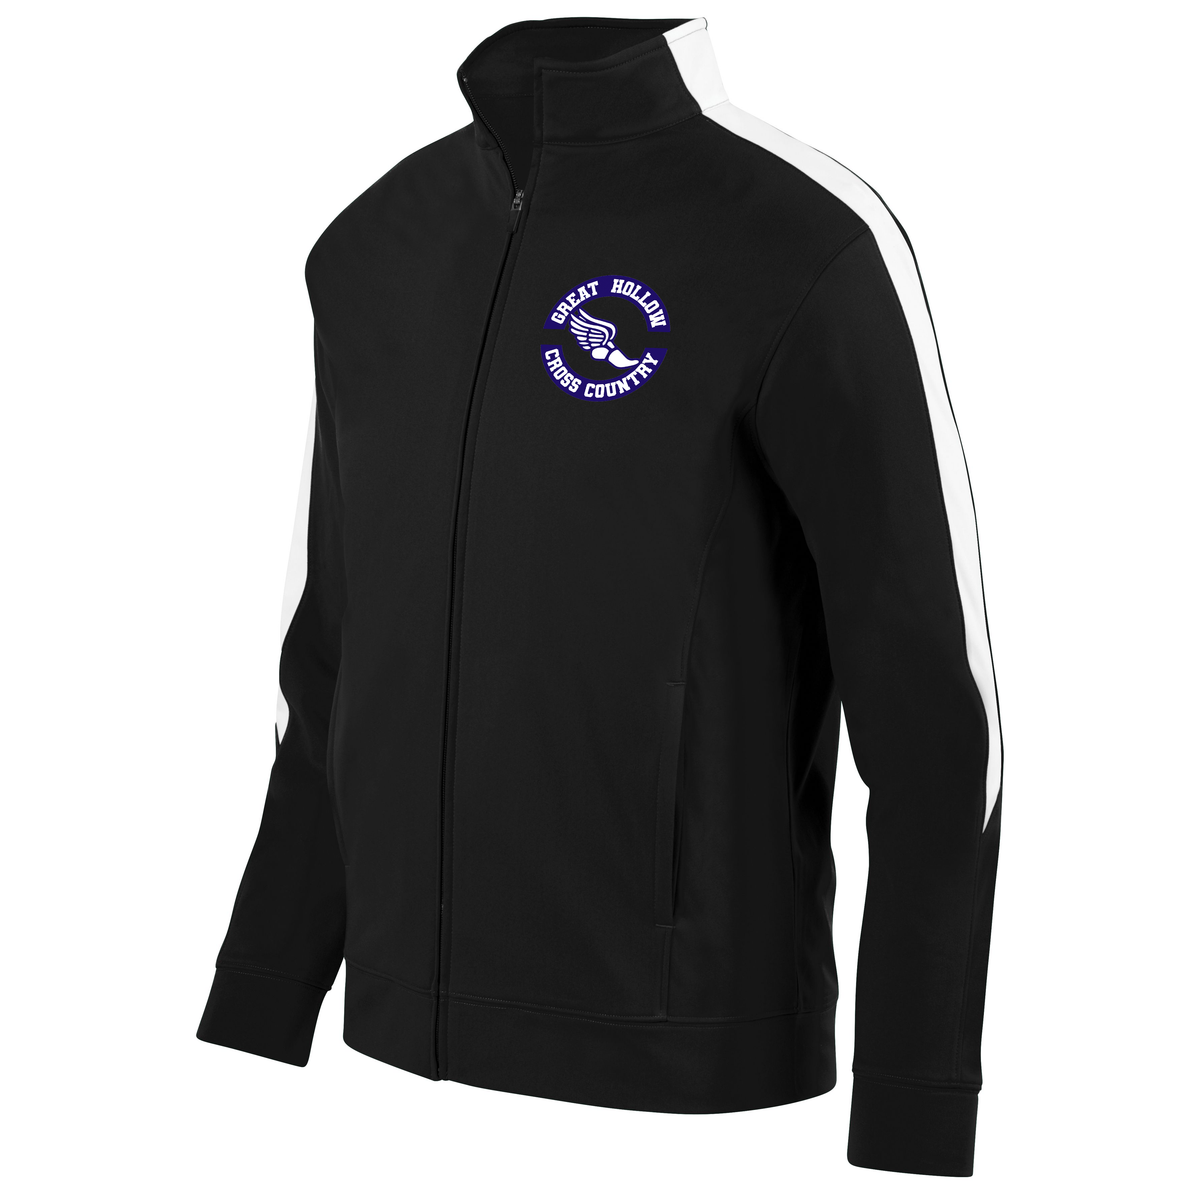 Great Hollow Cross Country Warm Up Jacket